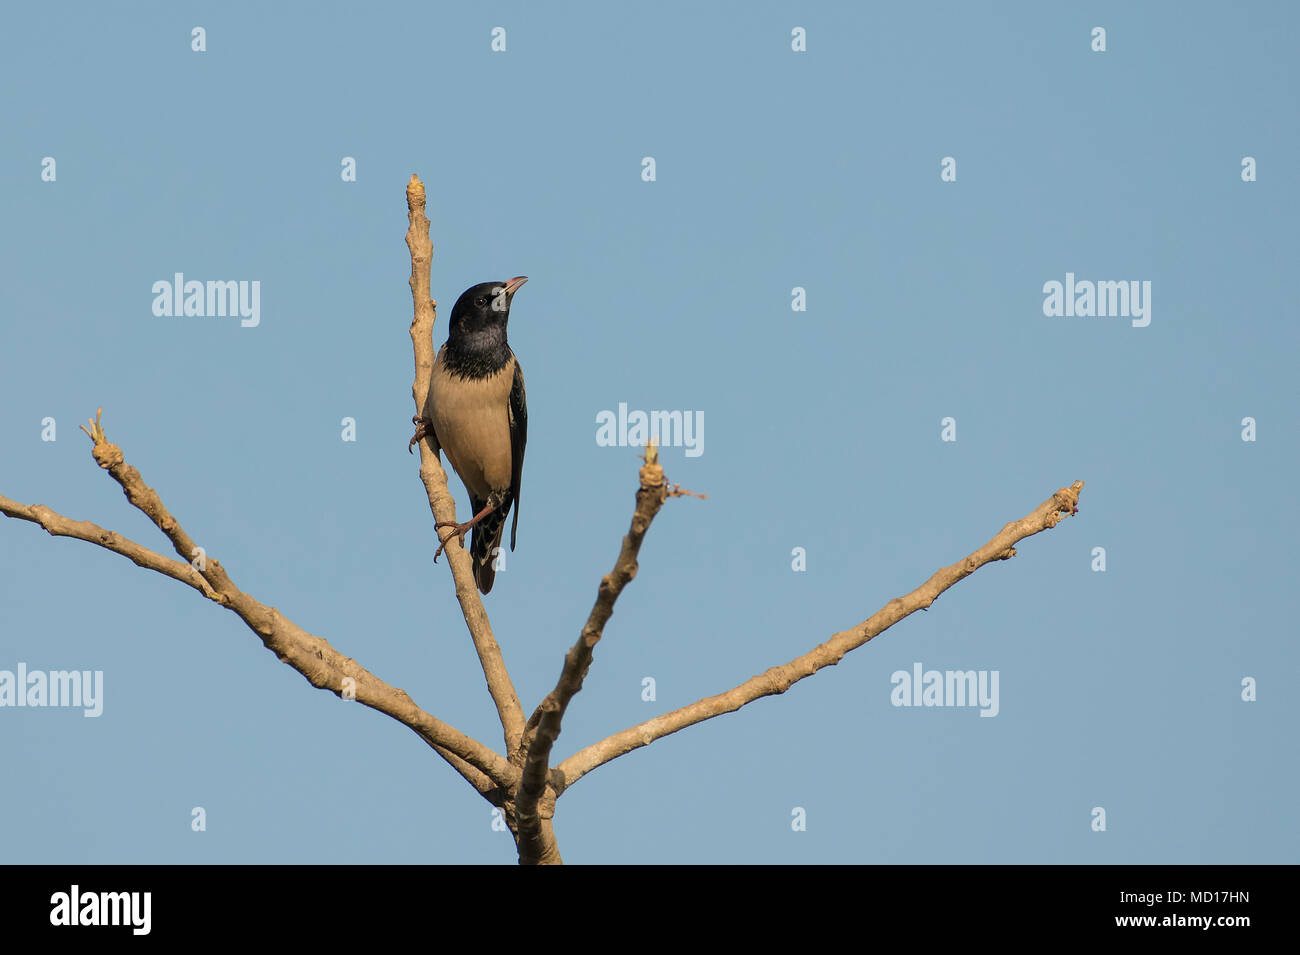 Bird: Portrait of a Male Rosy Starling Perched on a Tree Branch Stock Photo